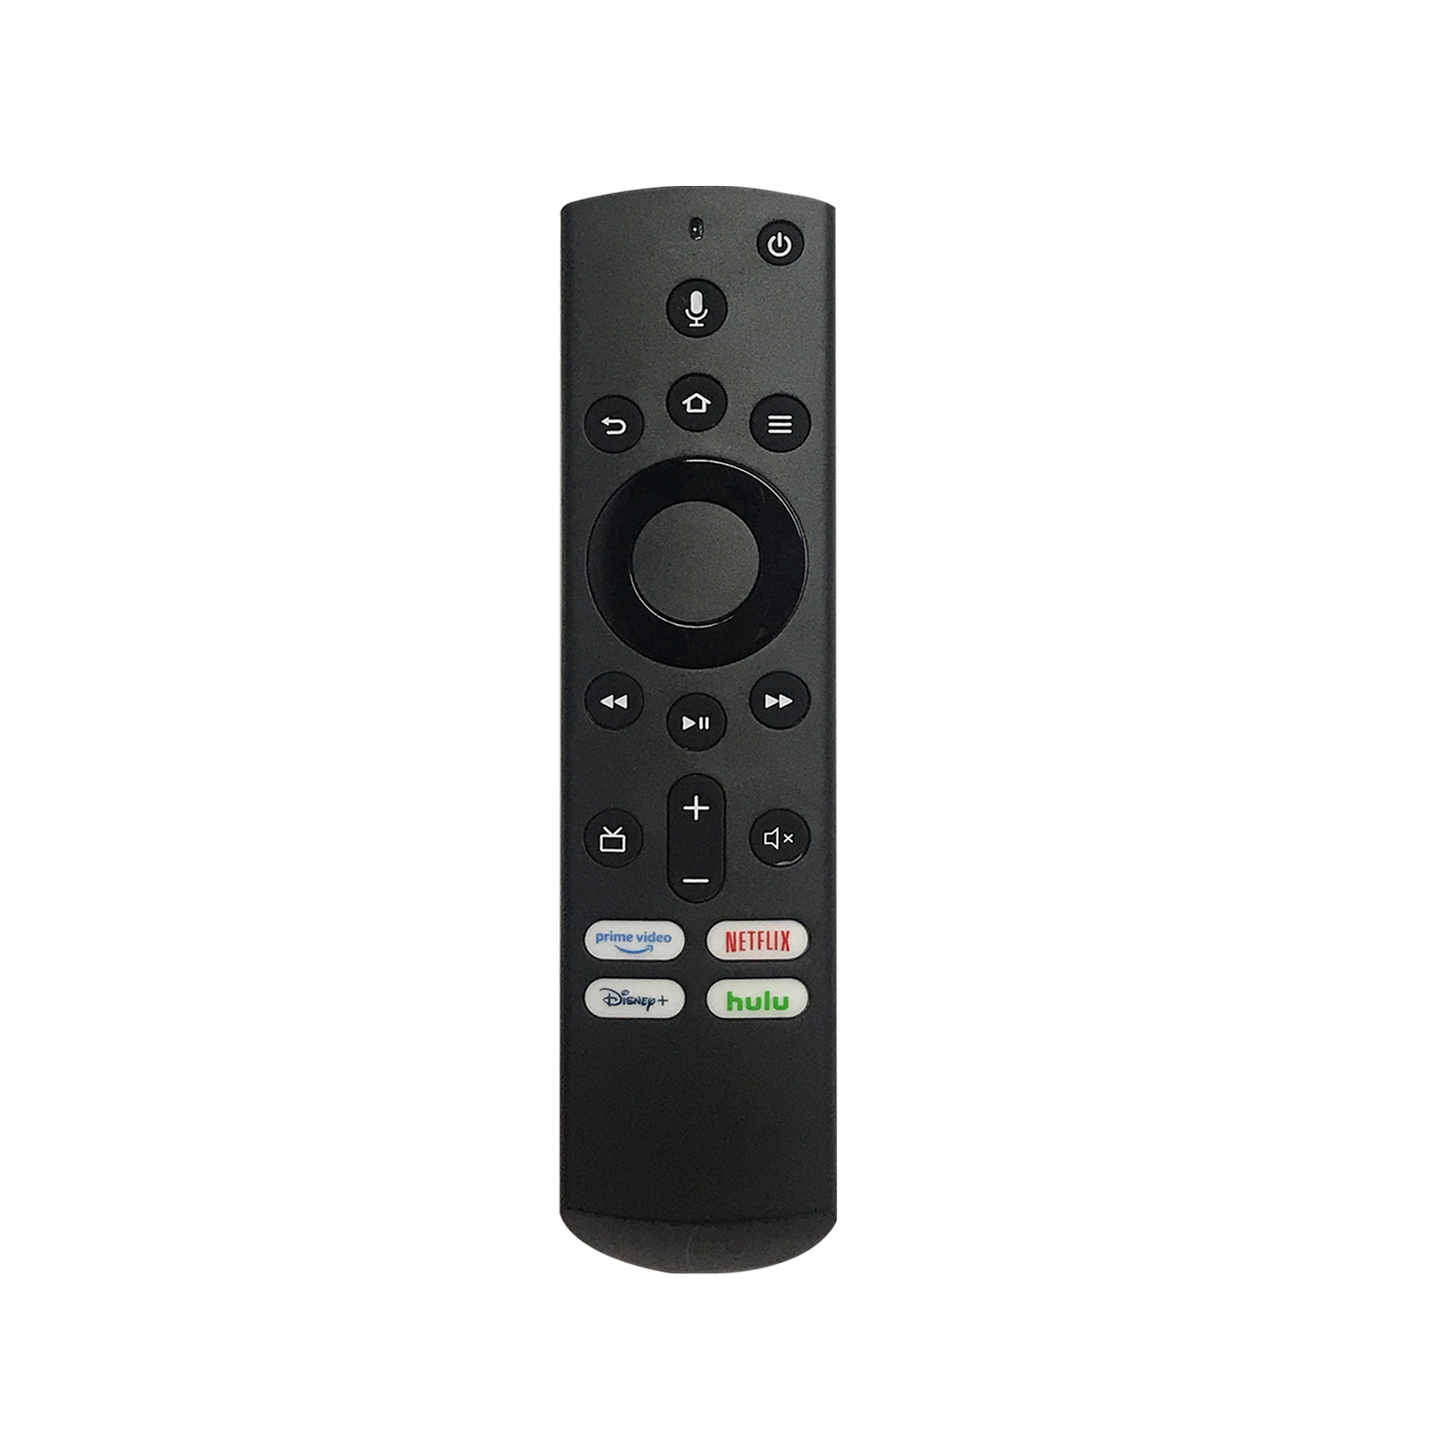 NS-RCFNA-19 CT-RC1US-19 Voice Replacement Remote Control for Insignia and Toshiba TV Fire TV Edition with Voice Search